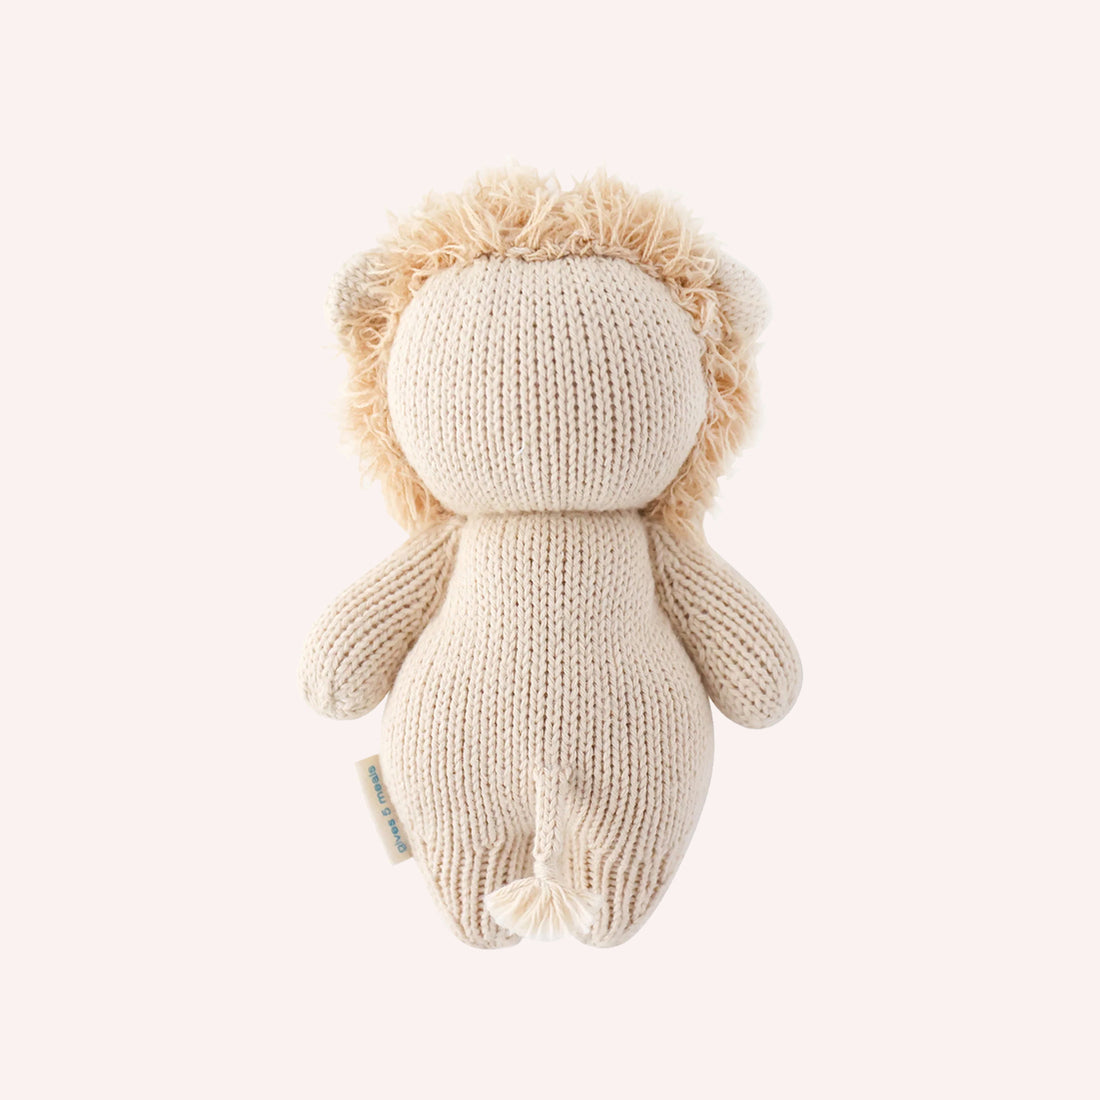 Hand Knitted Animal - Baby Lion